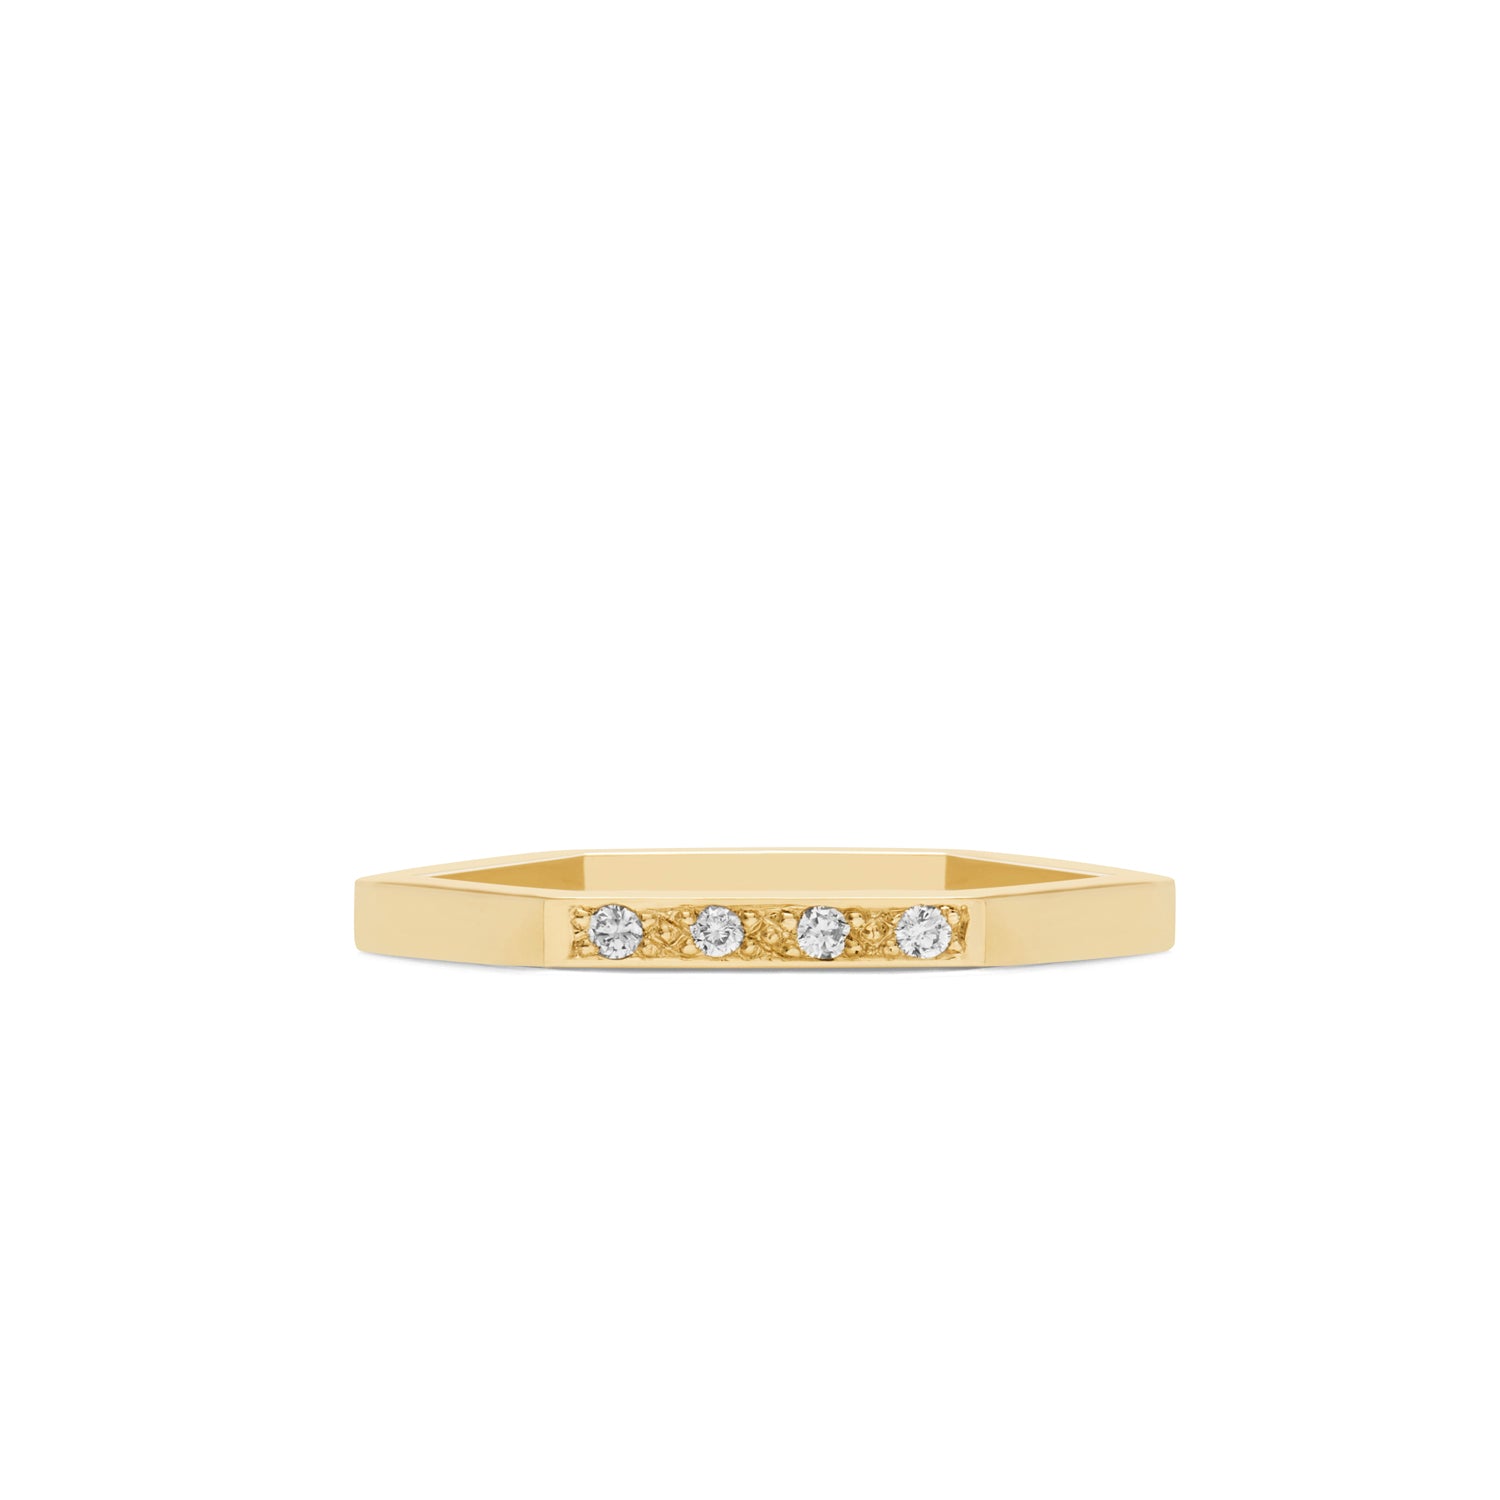 Hexagon Ring with Diamonds / 1 Side - 18k Yellow Gold